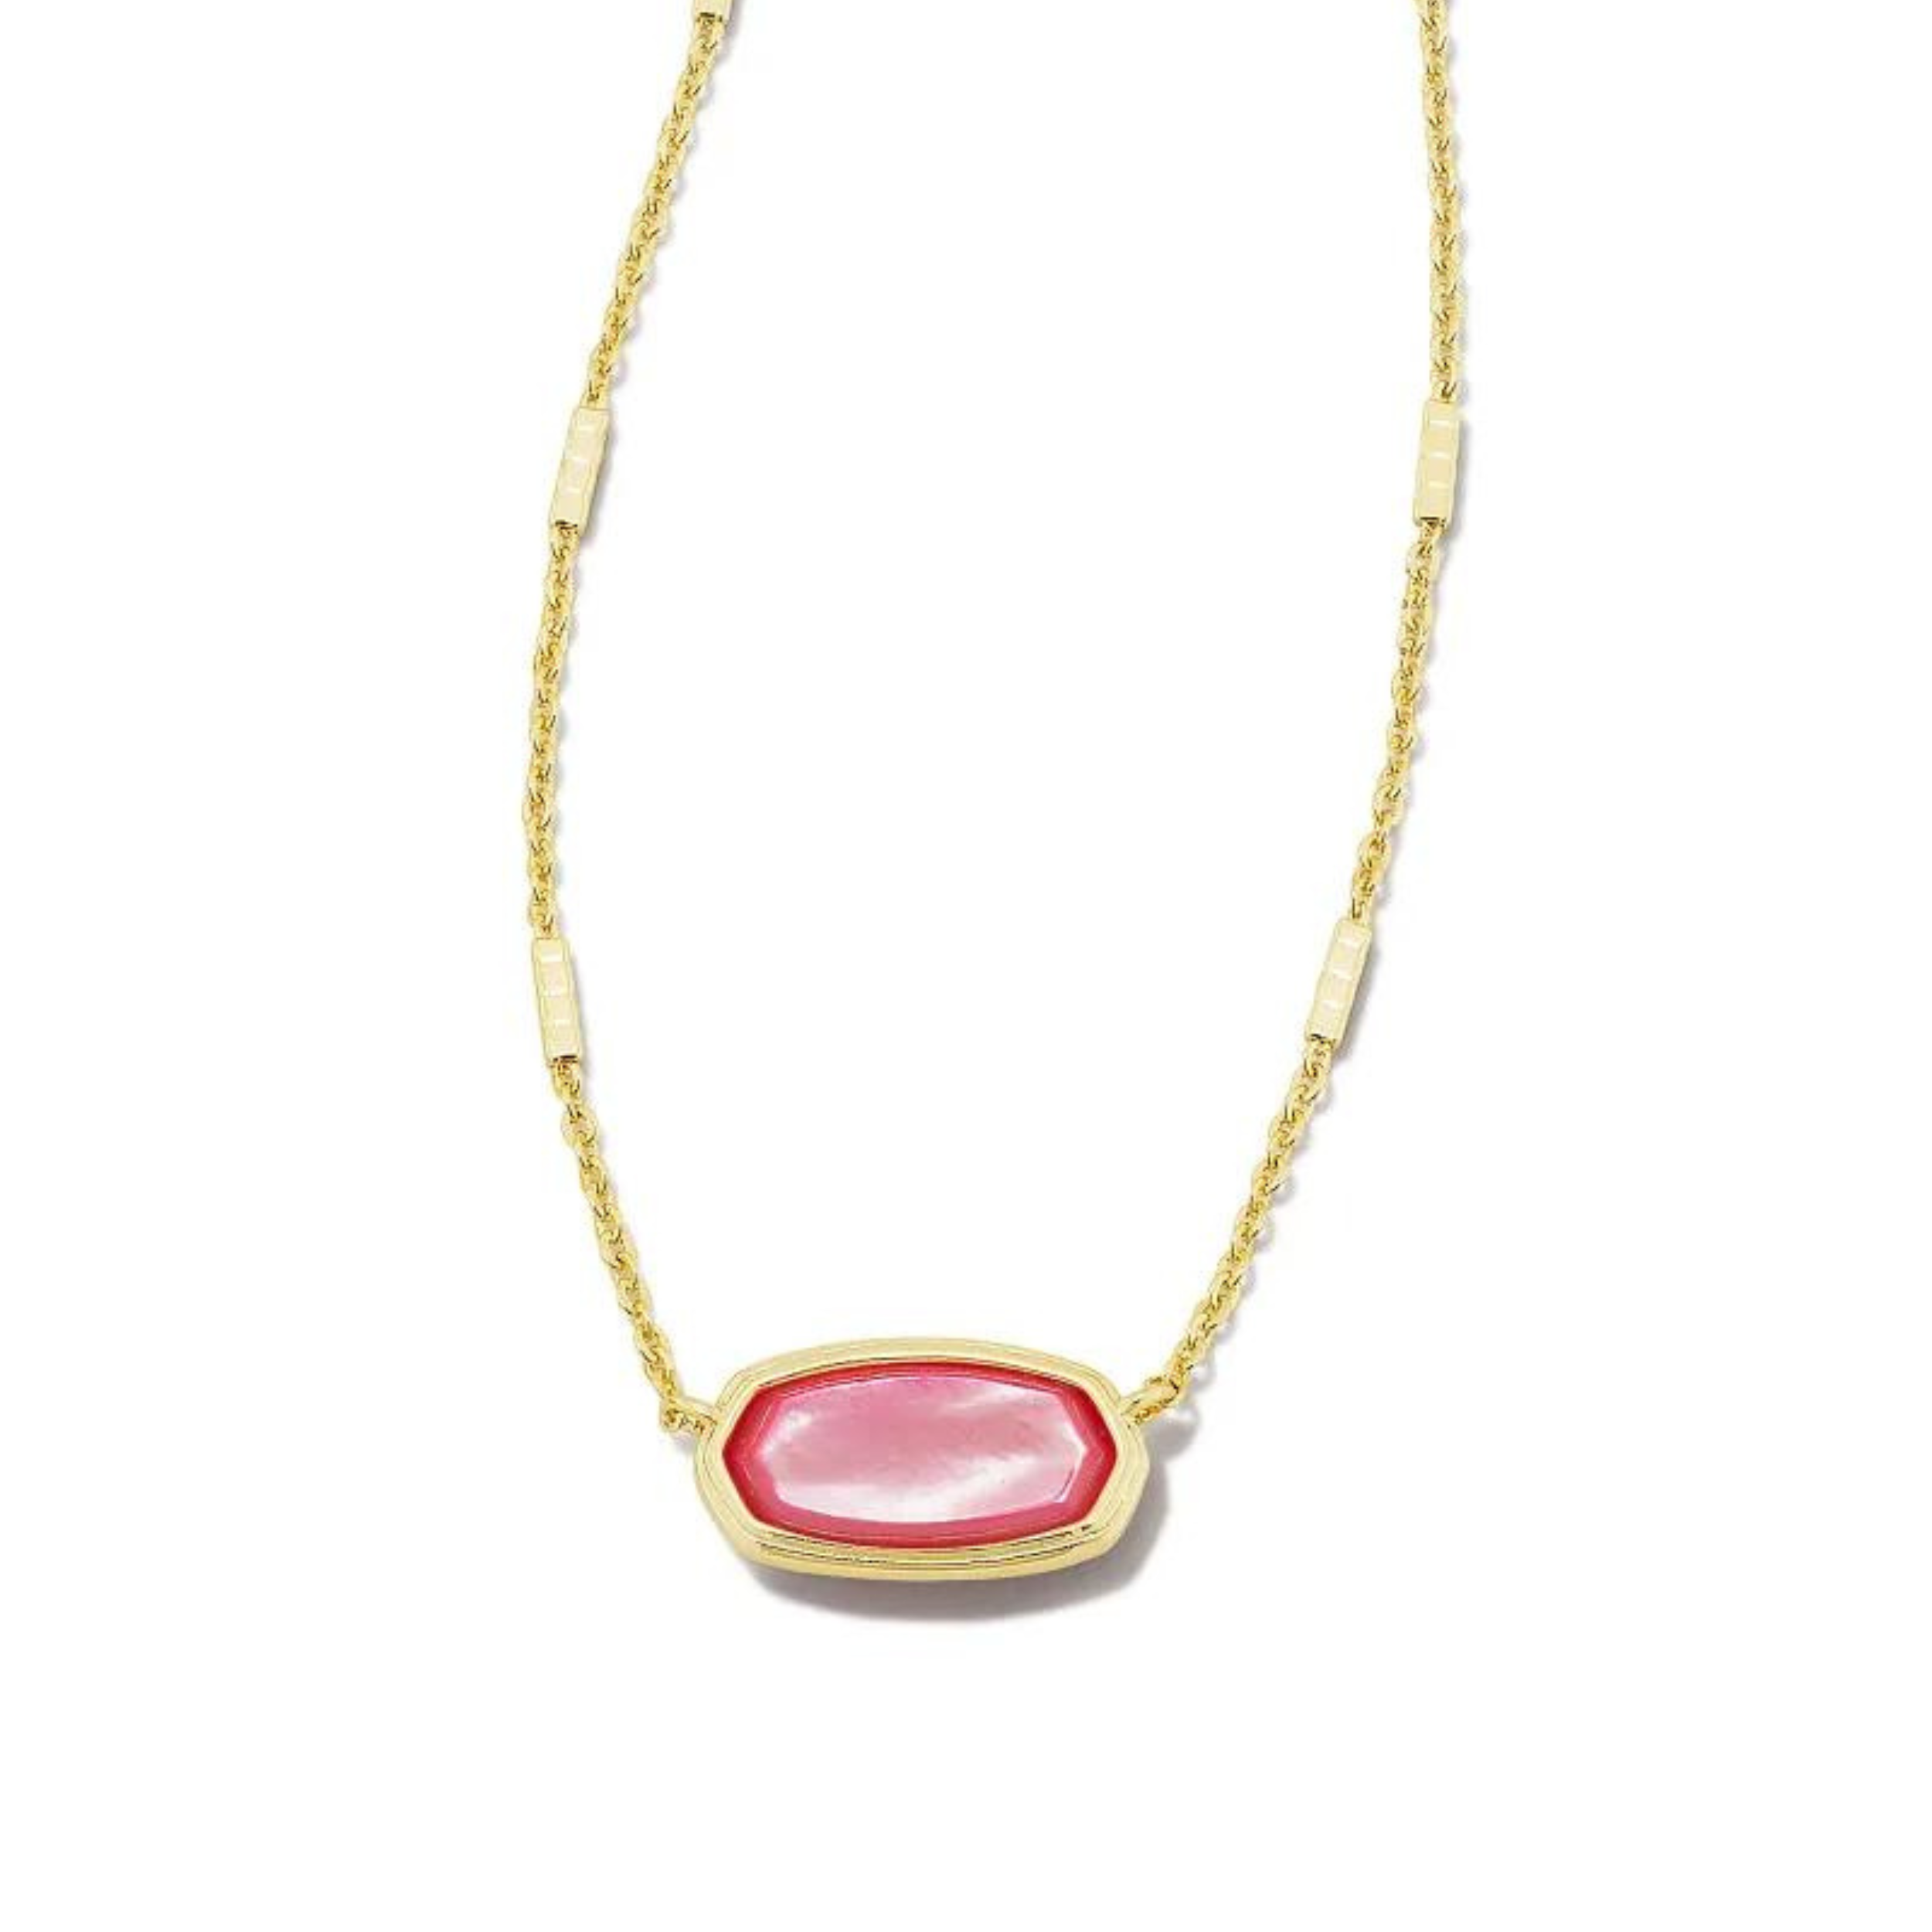 Gold chain necklace with peony mother of pearl stone, pictured on a white background.